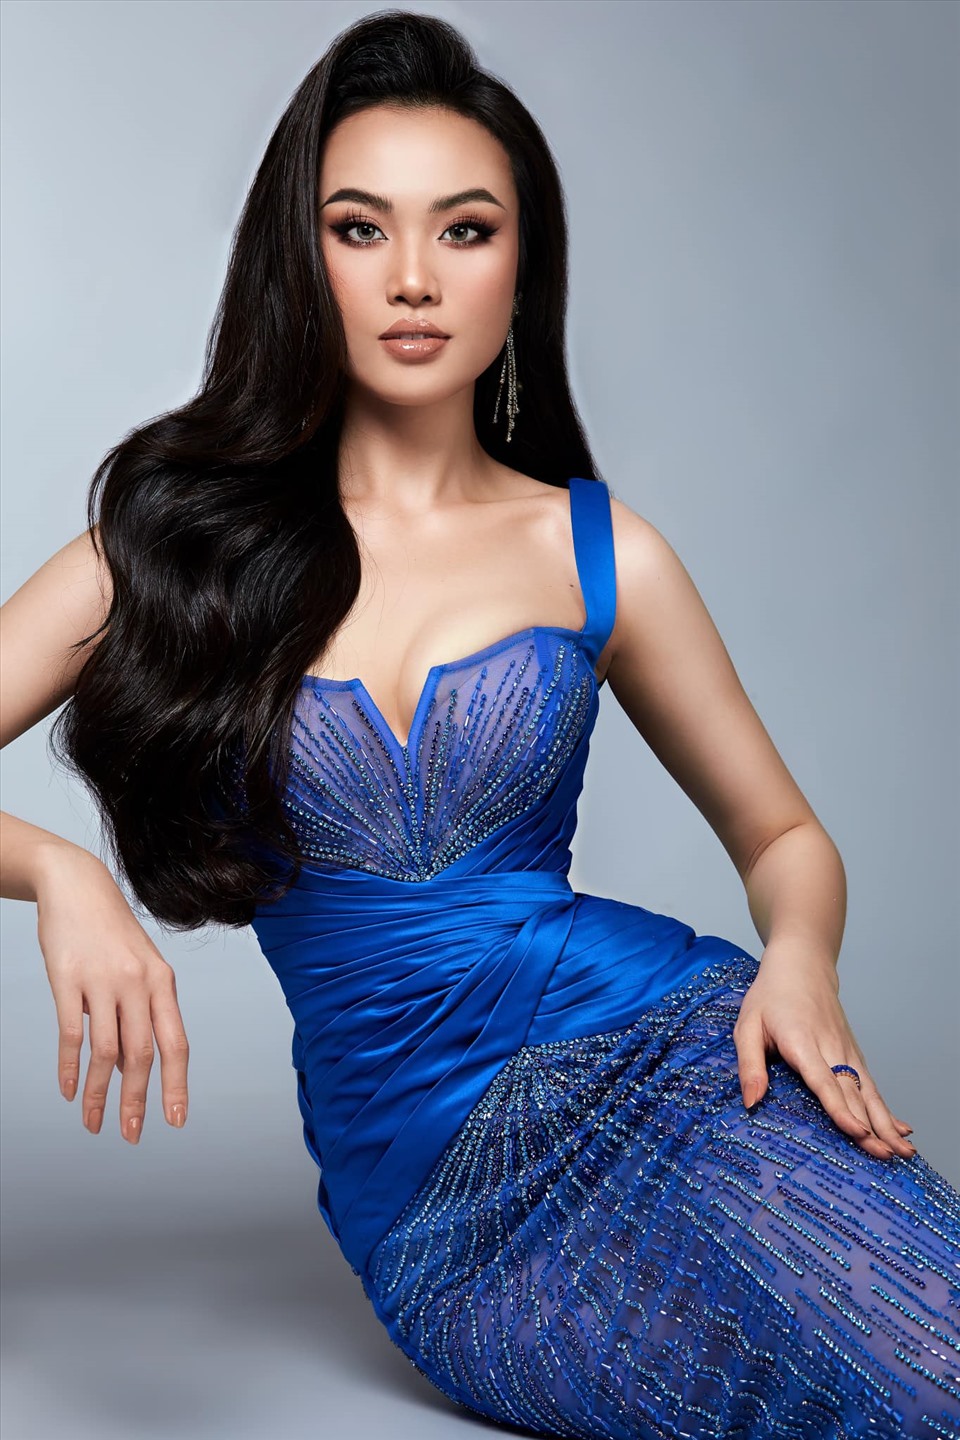 Outstanding contestants at Miss Universe Vietnam: Thao Nhi Le caused a storm, revealing a series of factors that promised to explode - Photo 10.